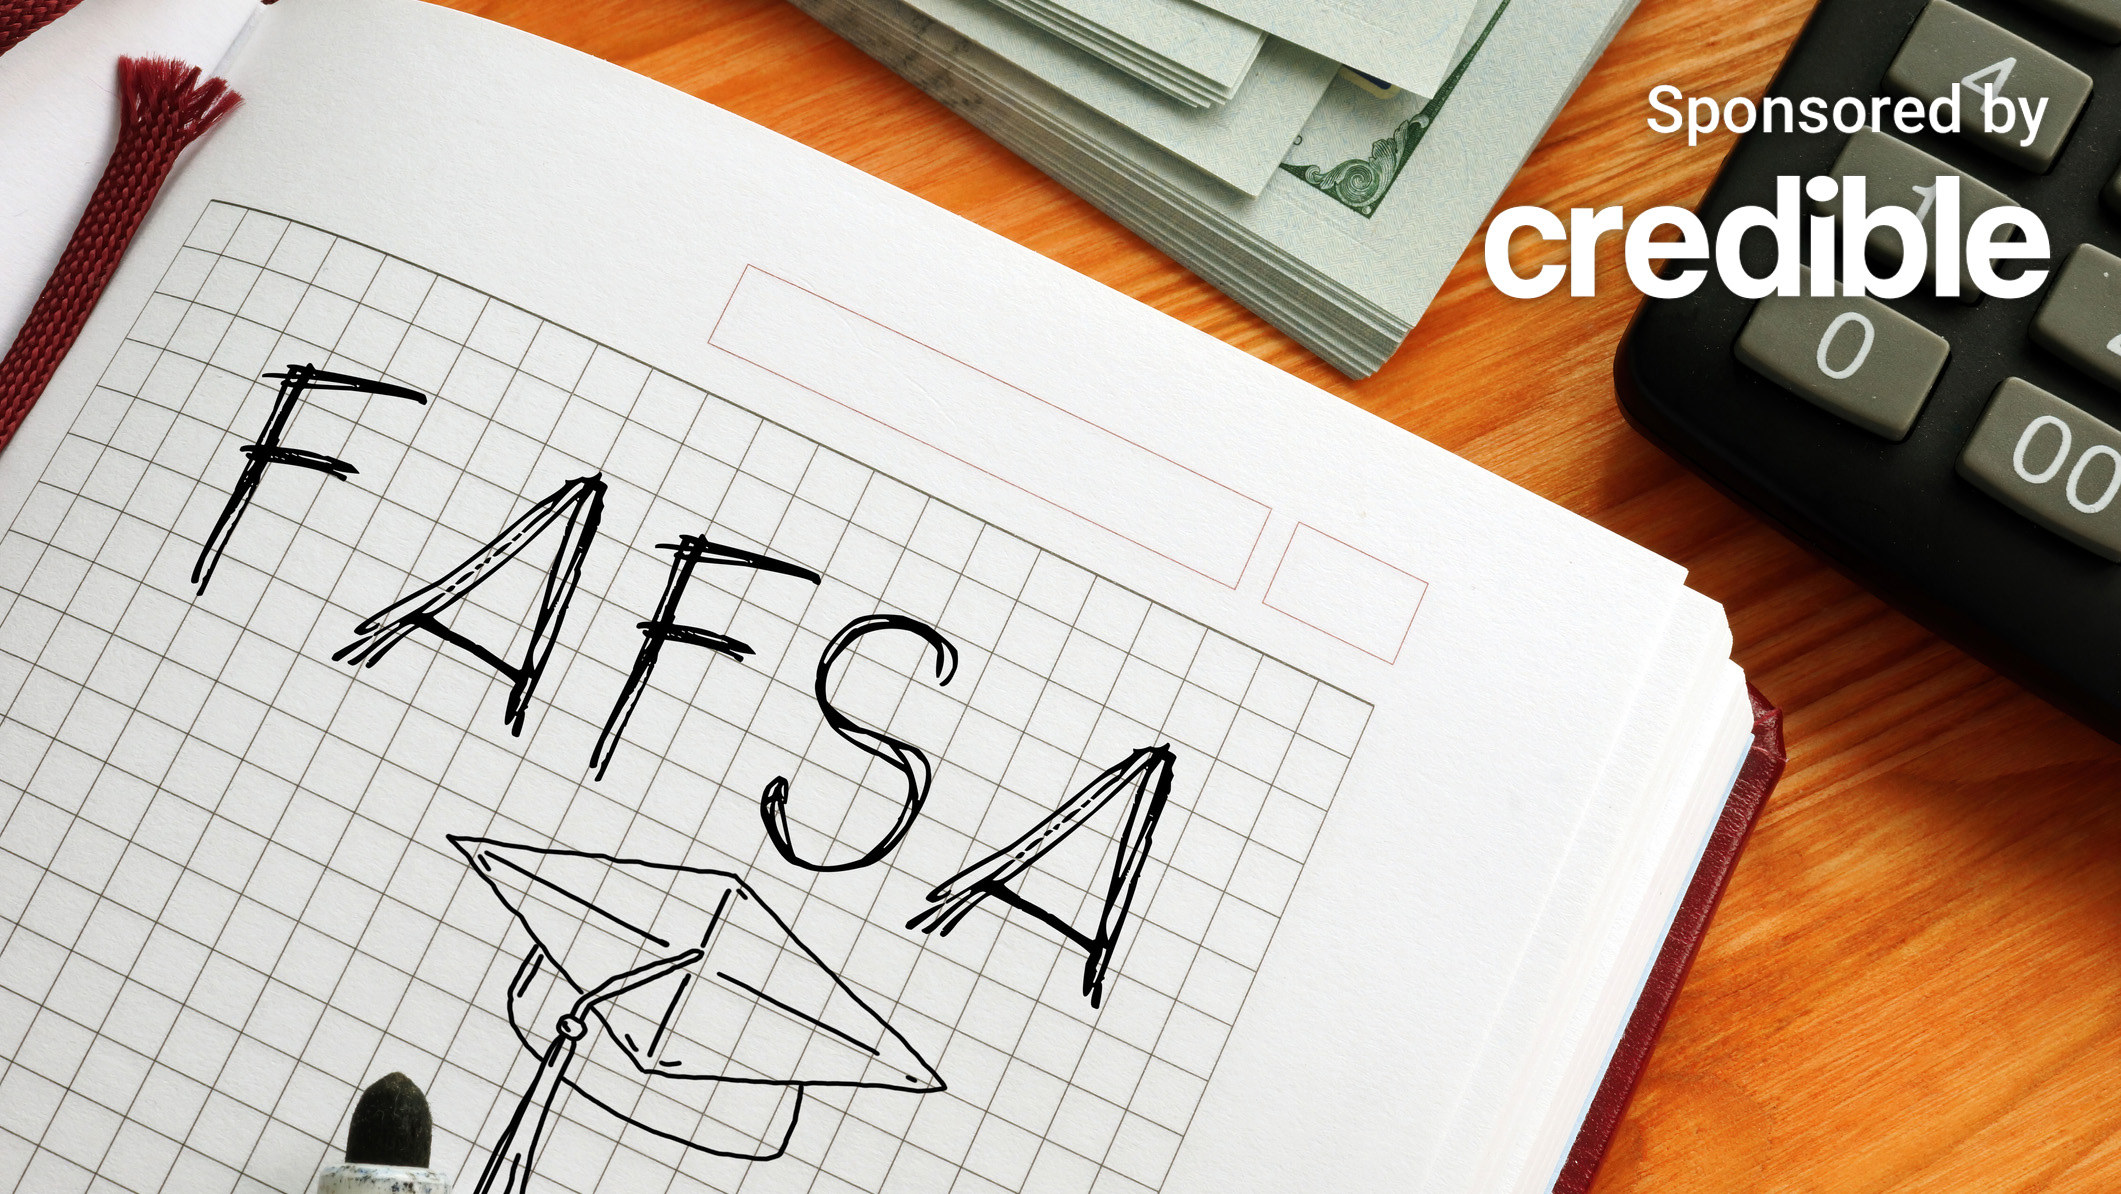 75% of families unaware FAFSA application opens in October, survey says